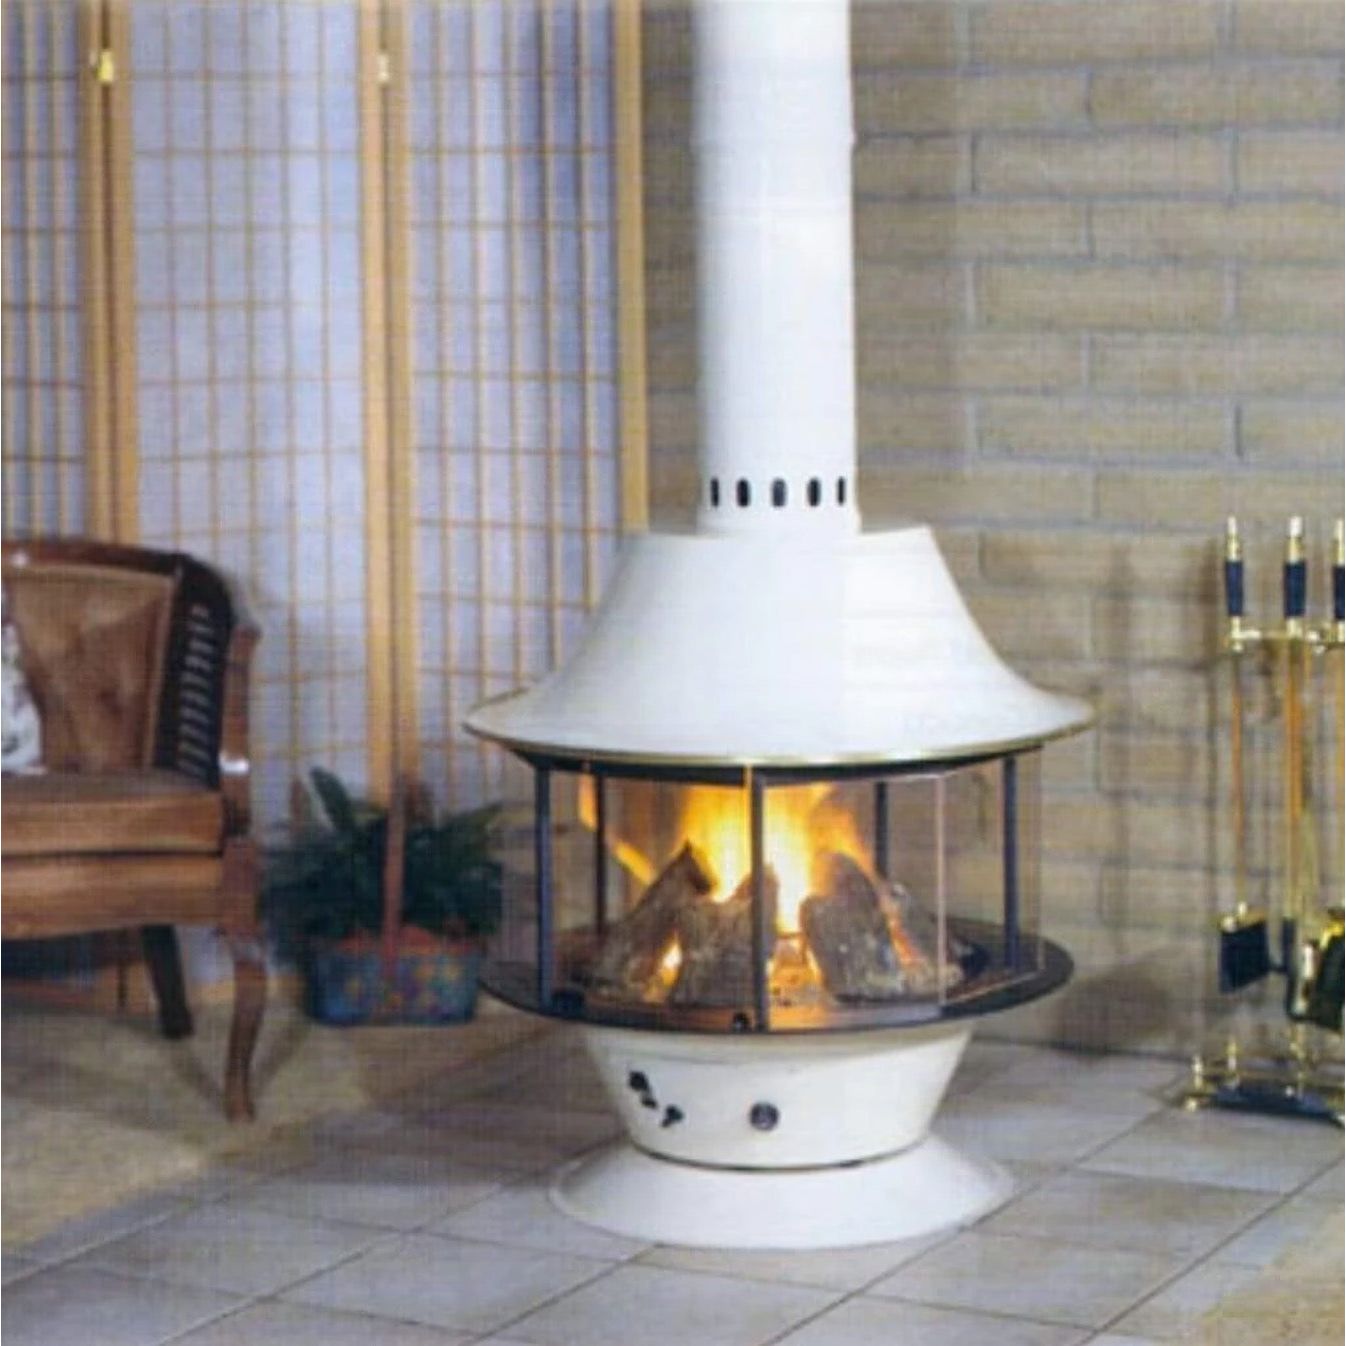 Malm Spin-A-Fire 32" Freestanding Gas Fireplace With Remote Control & Porcelain Base